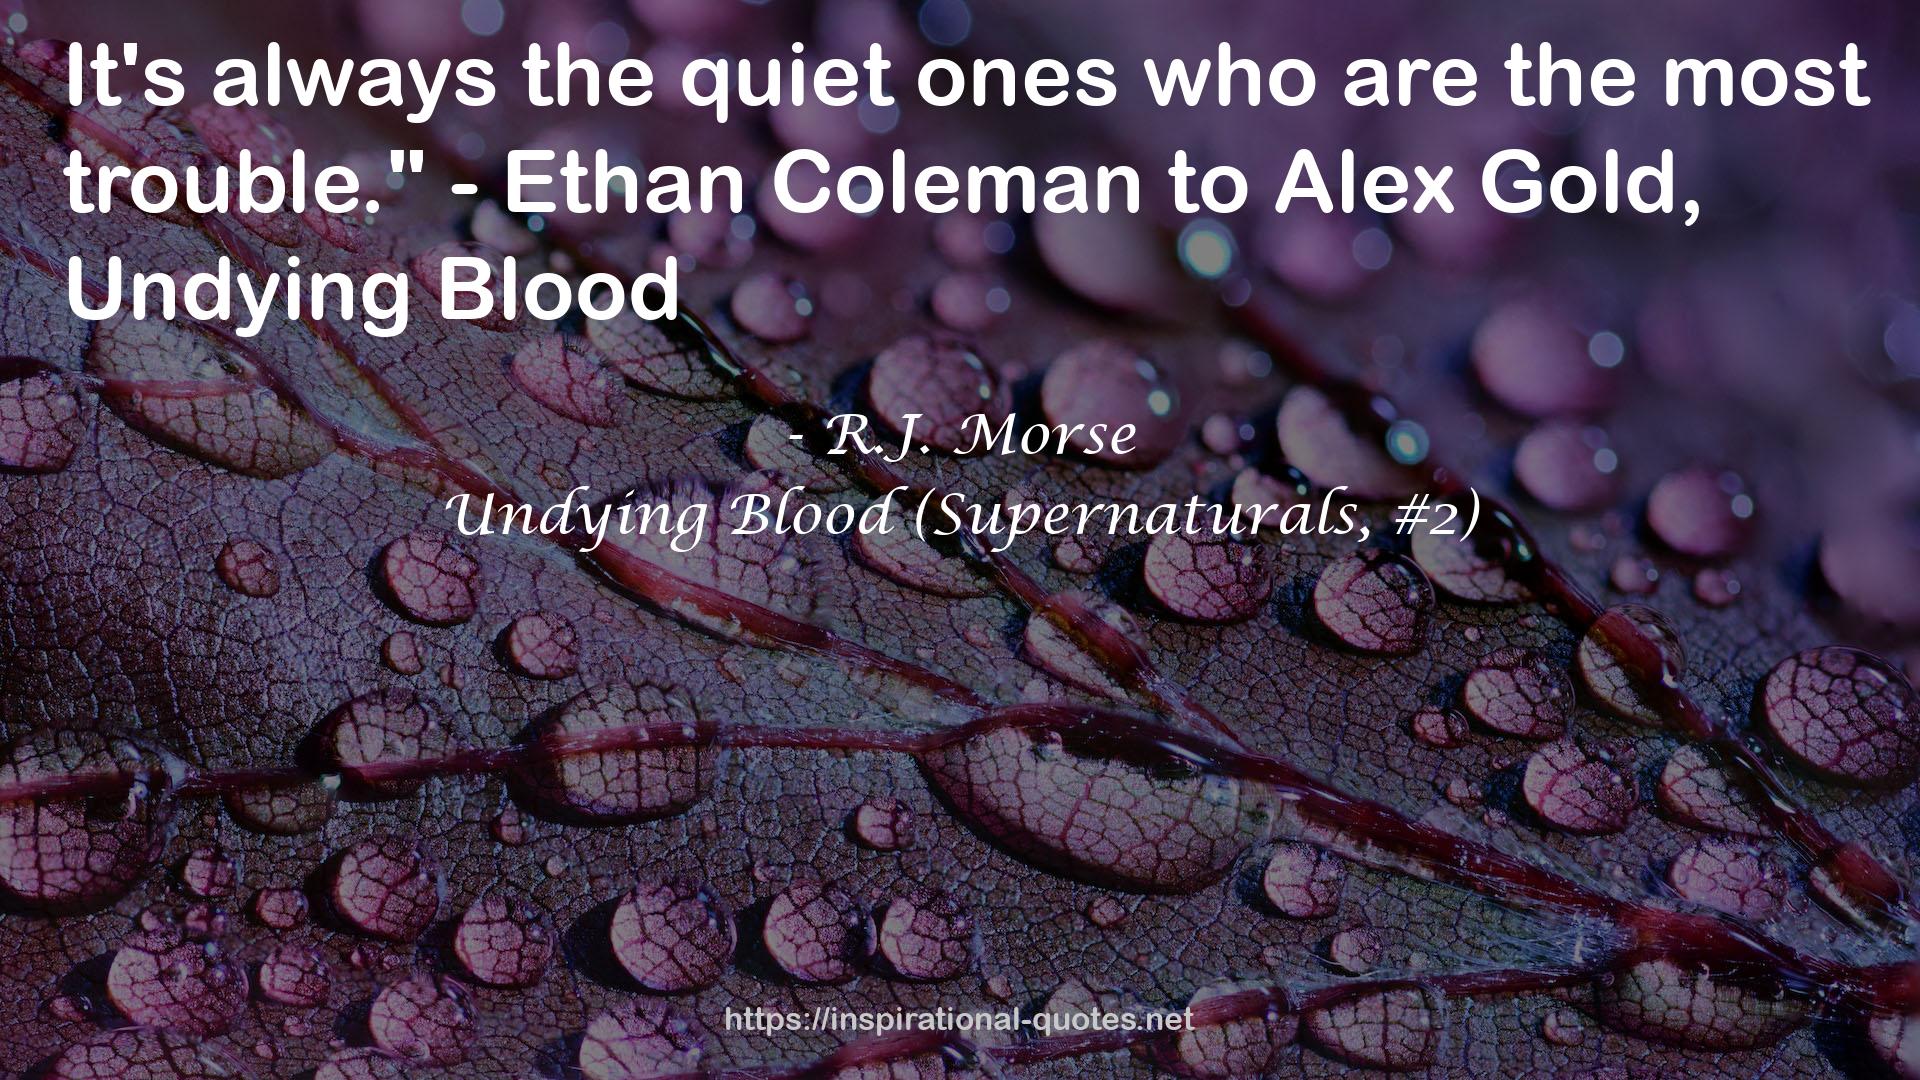 Undying Blood (Supernaturals, #2) QUOTES